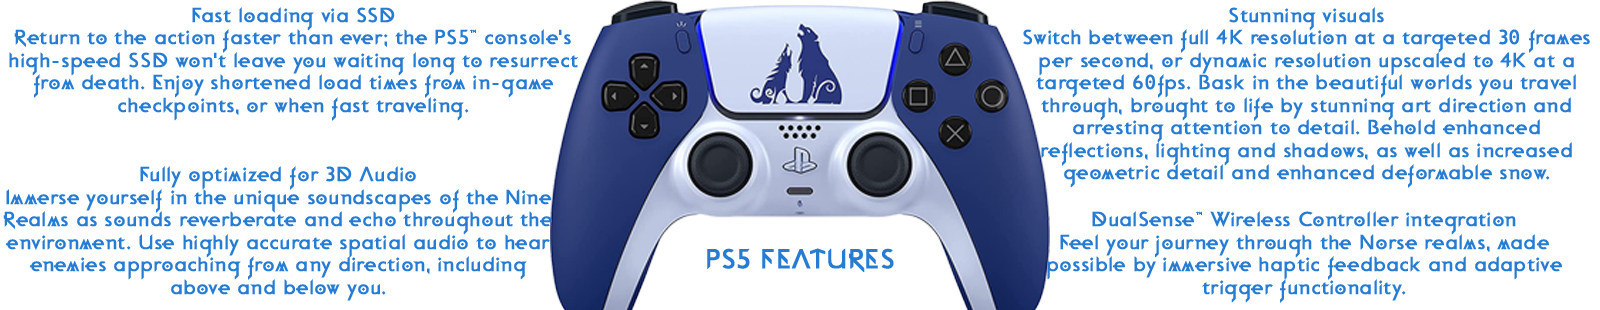 ps5featuresbanner1sniqb.png